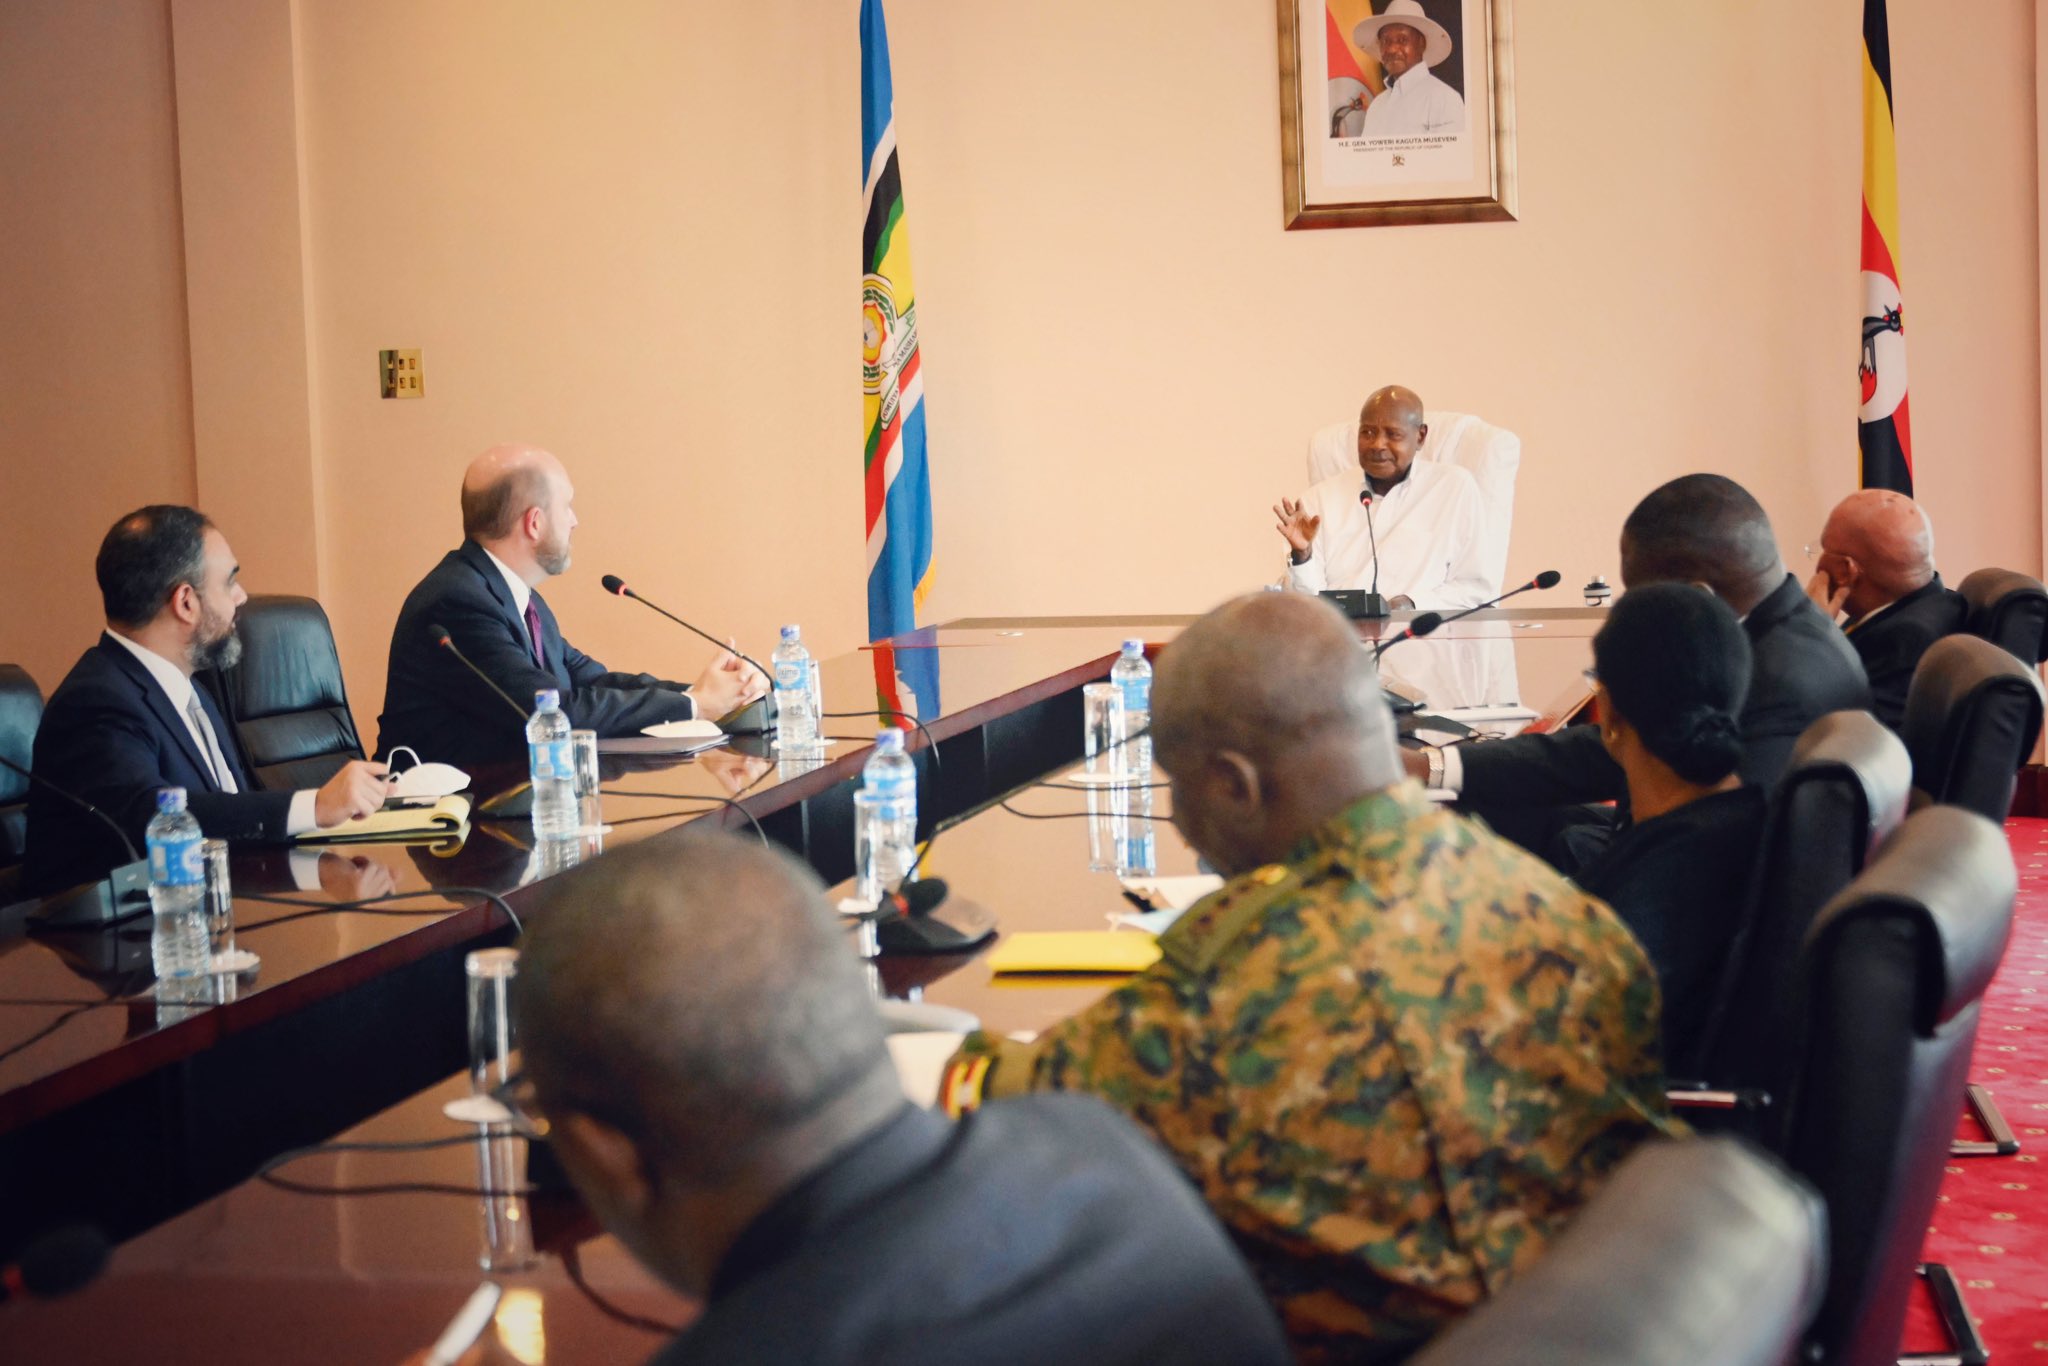 President Museveni and U.S Ambassador Hold Productive Meeting at Statehouse